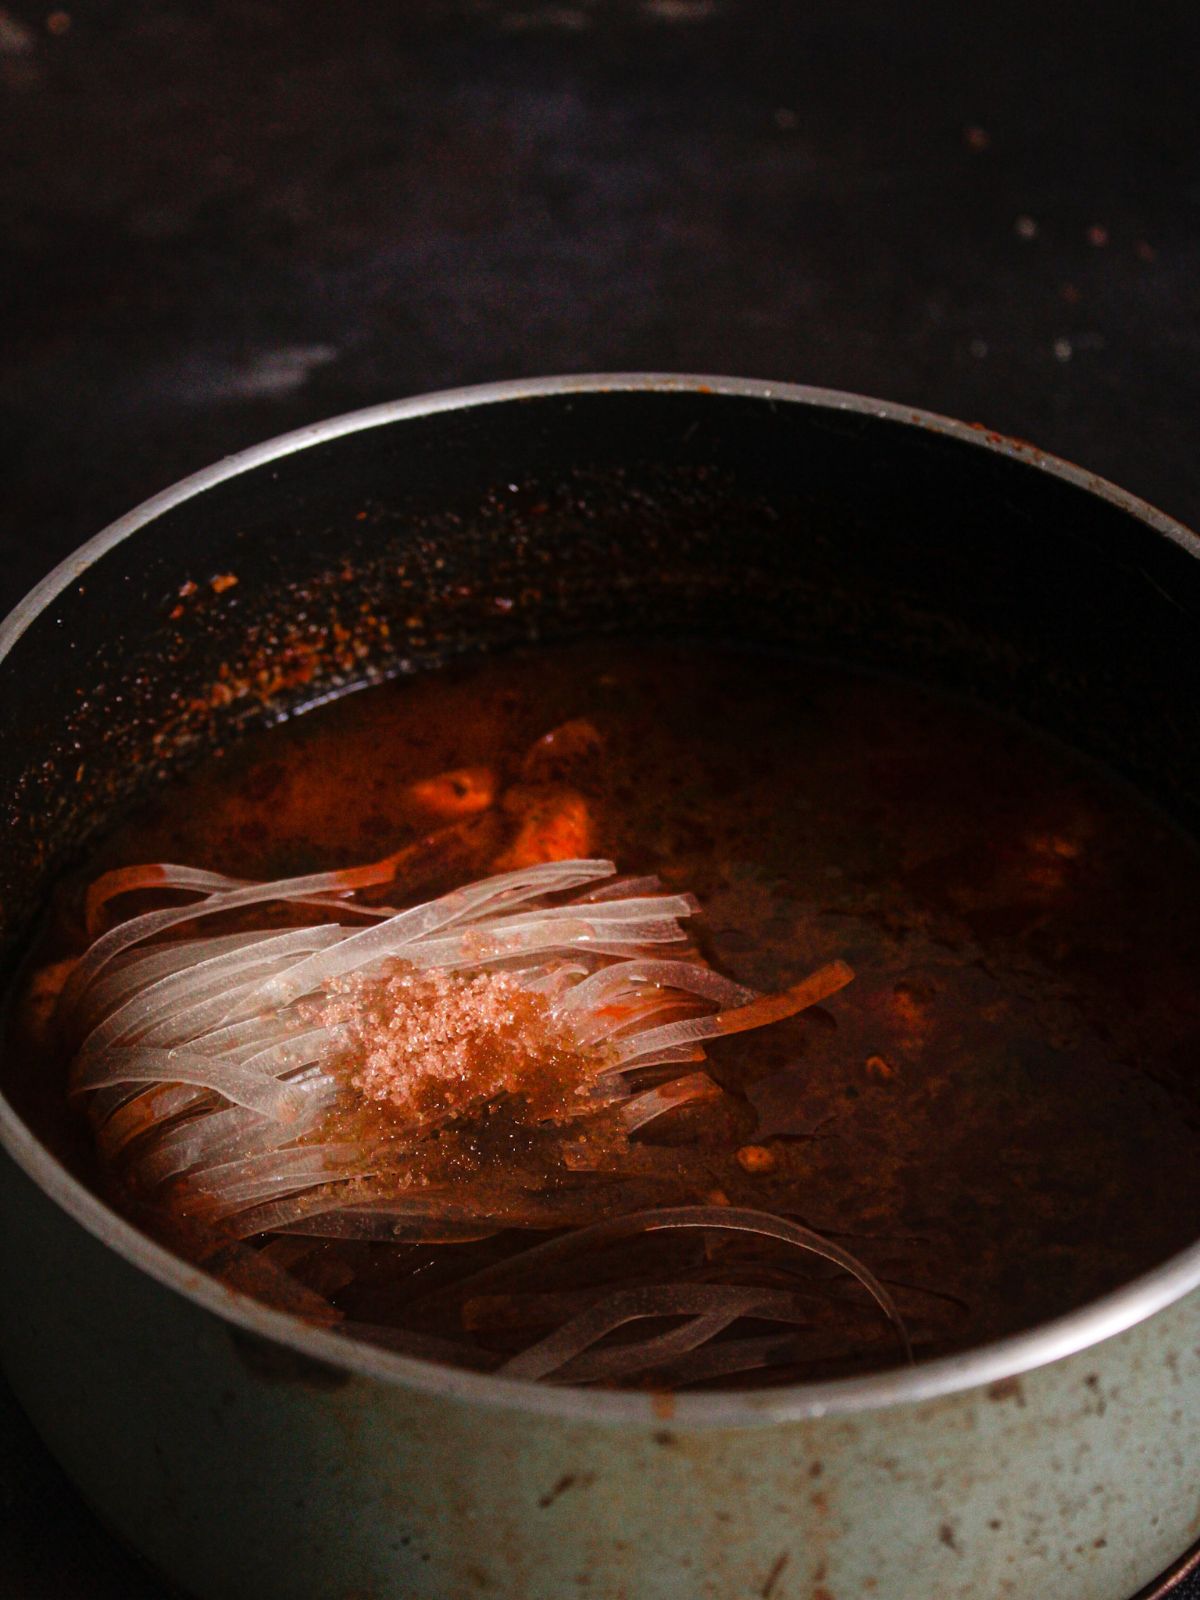 noodles in stockpot with red broth